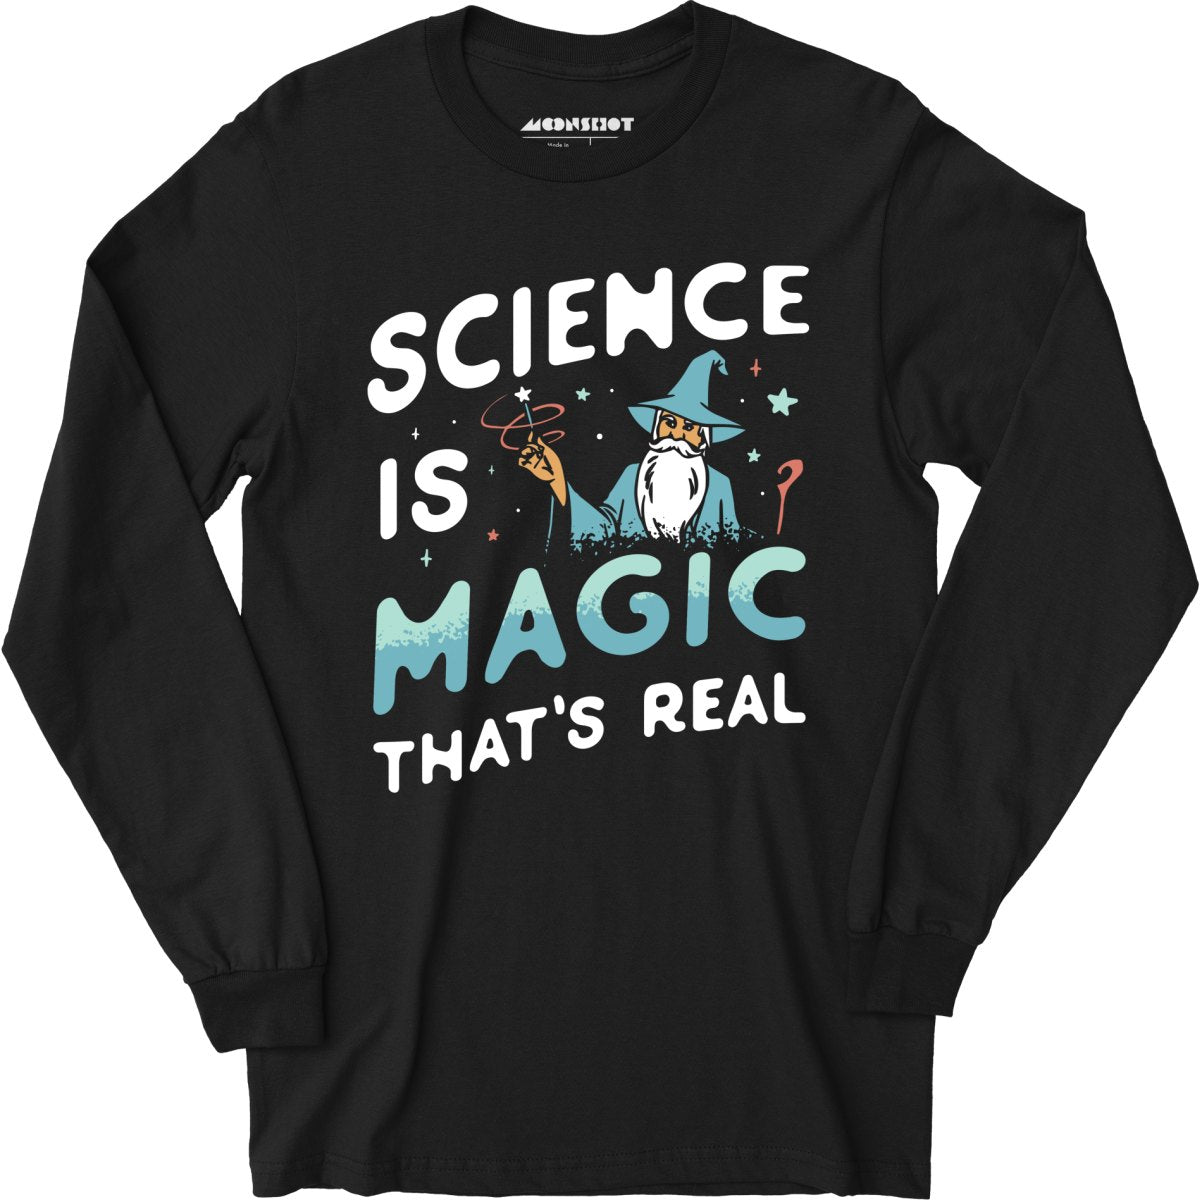 Science is Magic That's Real - Long Sleeve T-Shirt